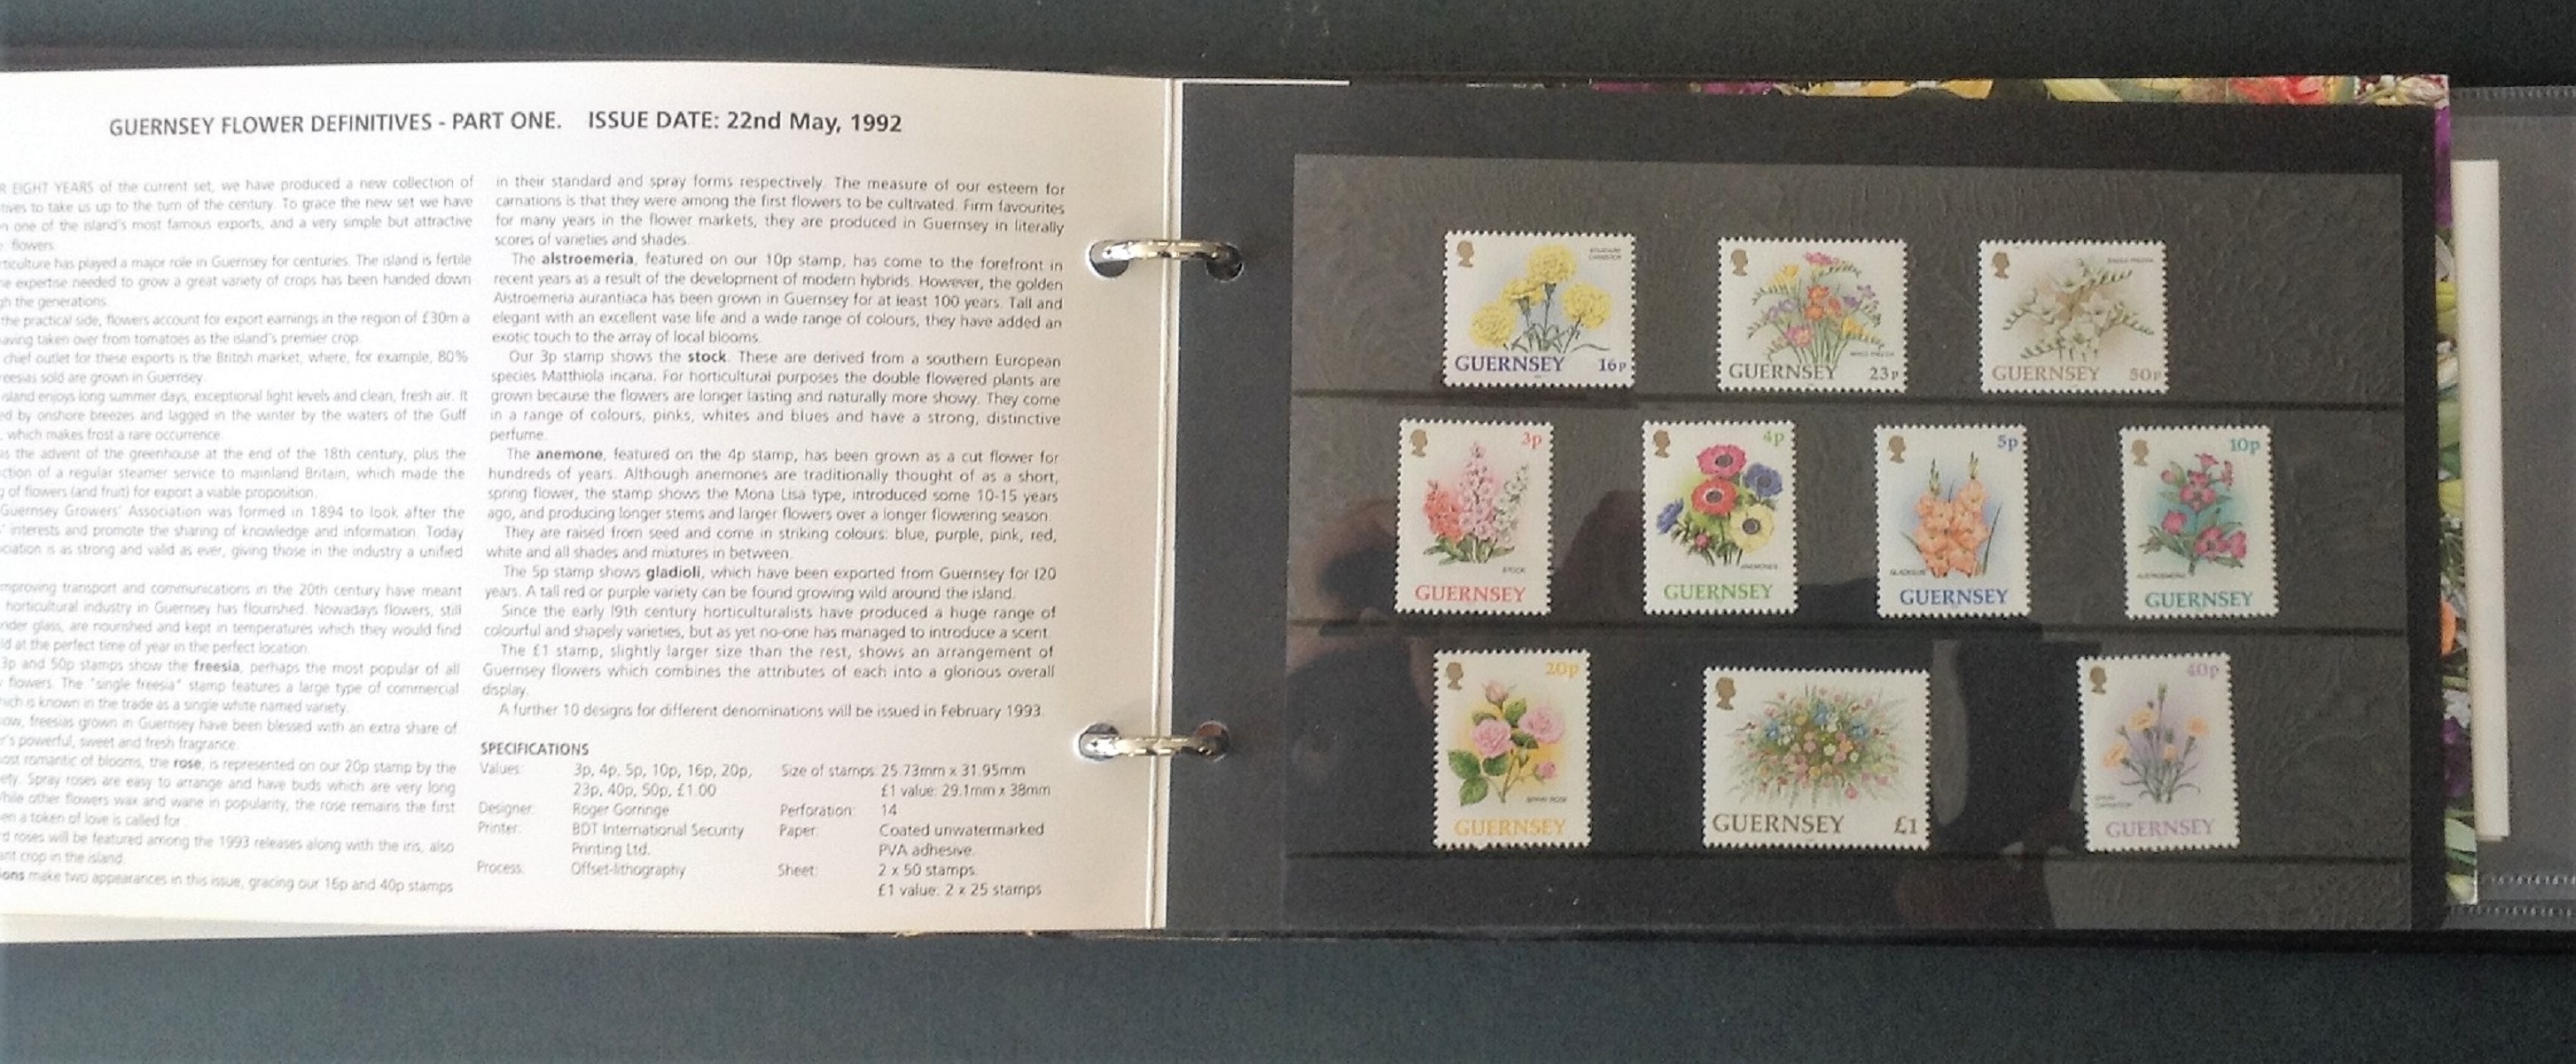 Guernsey flower collection album. Includes 2 presentation pack, 1993 flower definitives I and II. - Image 2 of 4